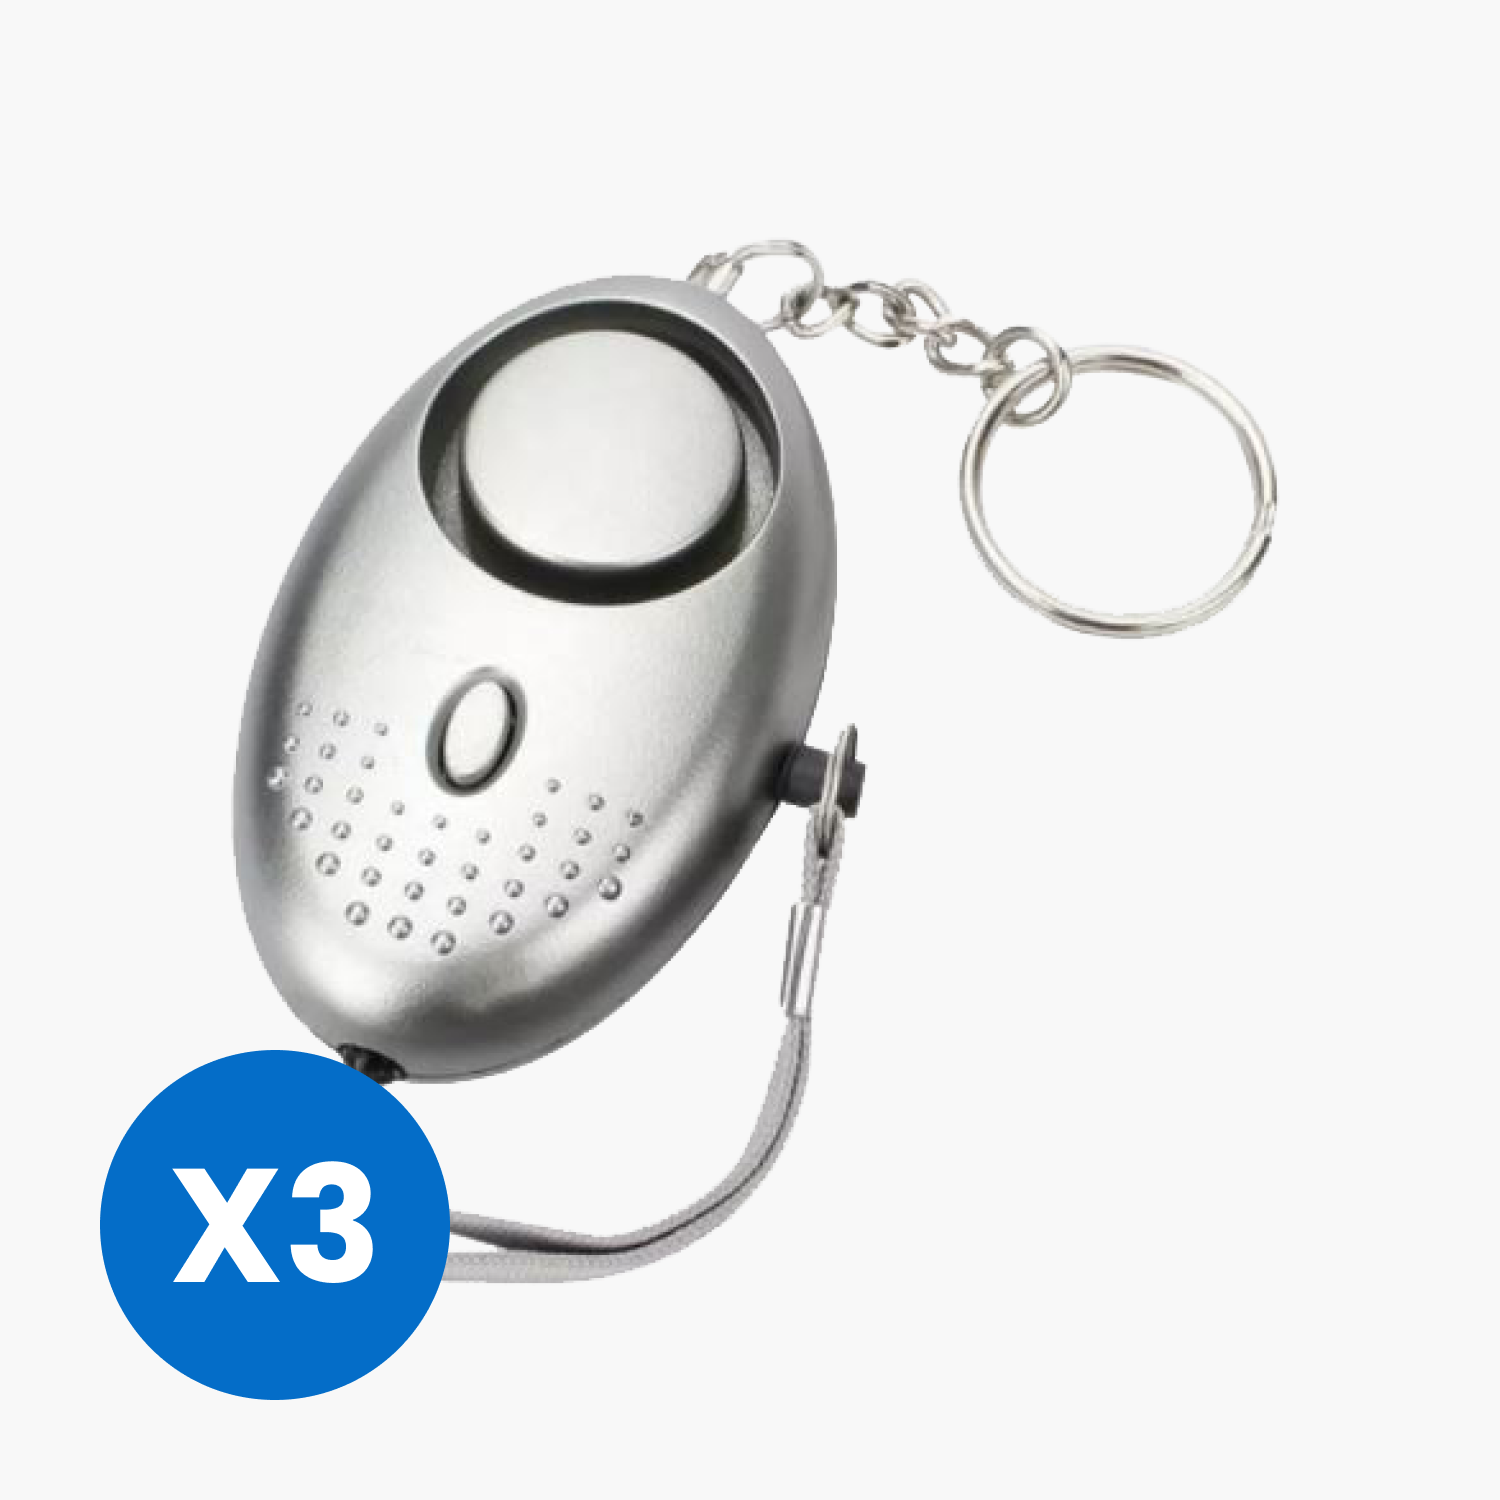 PERSONAL SAFETY KEYCHAIN ALARM _ 4 PIECES – V2